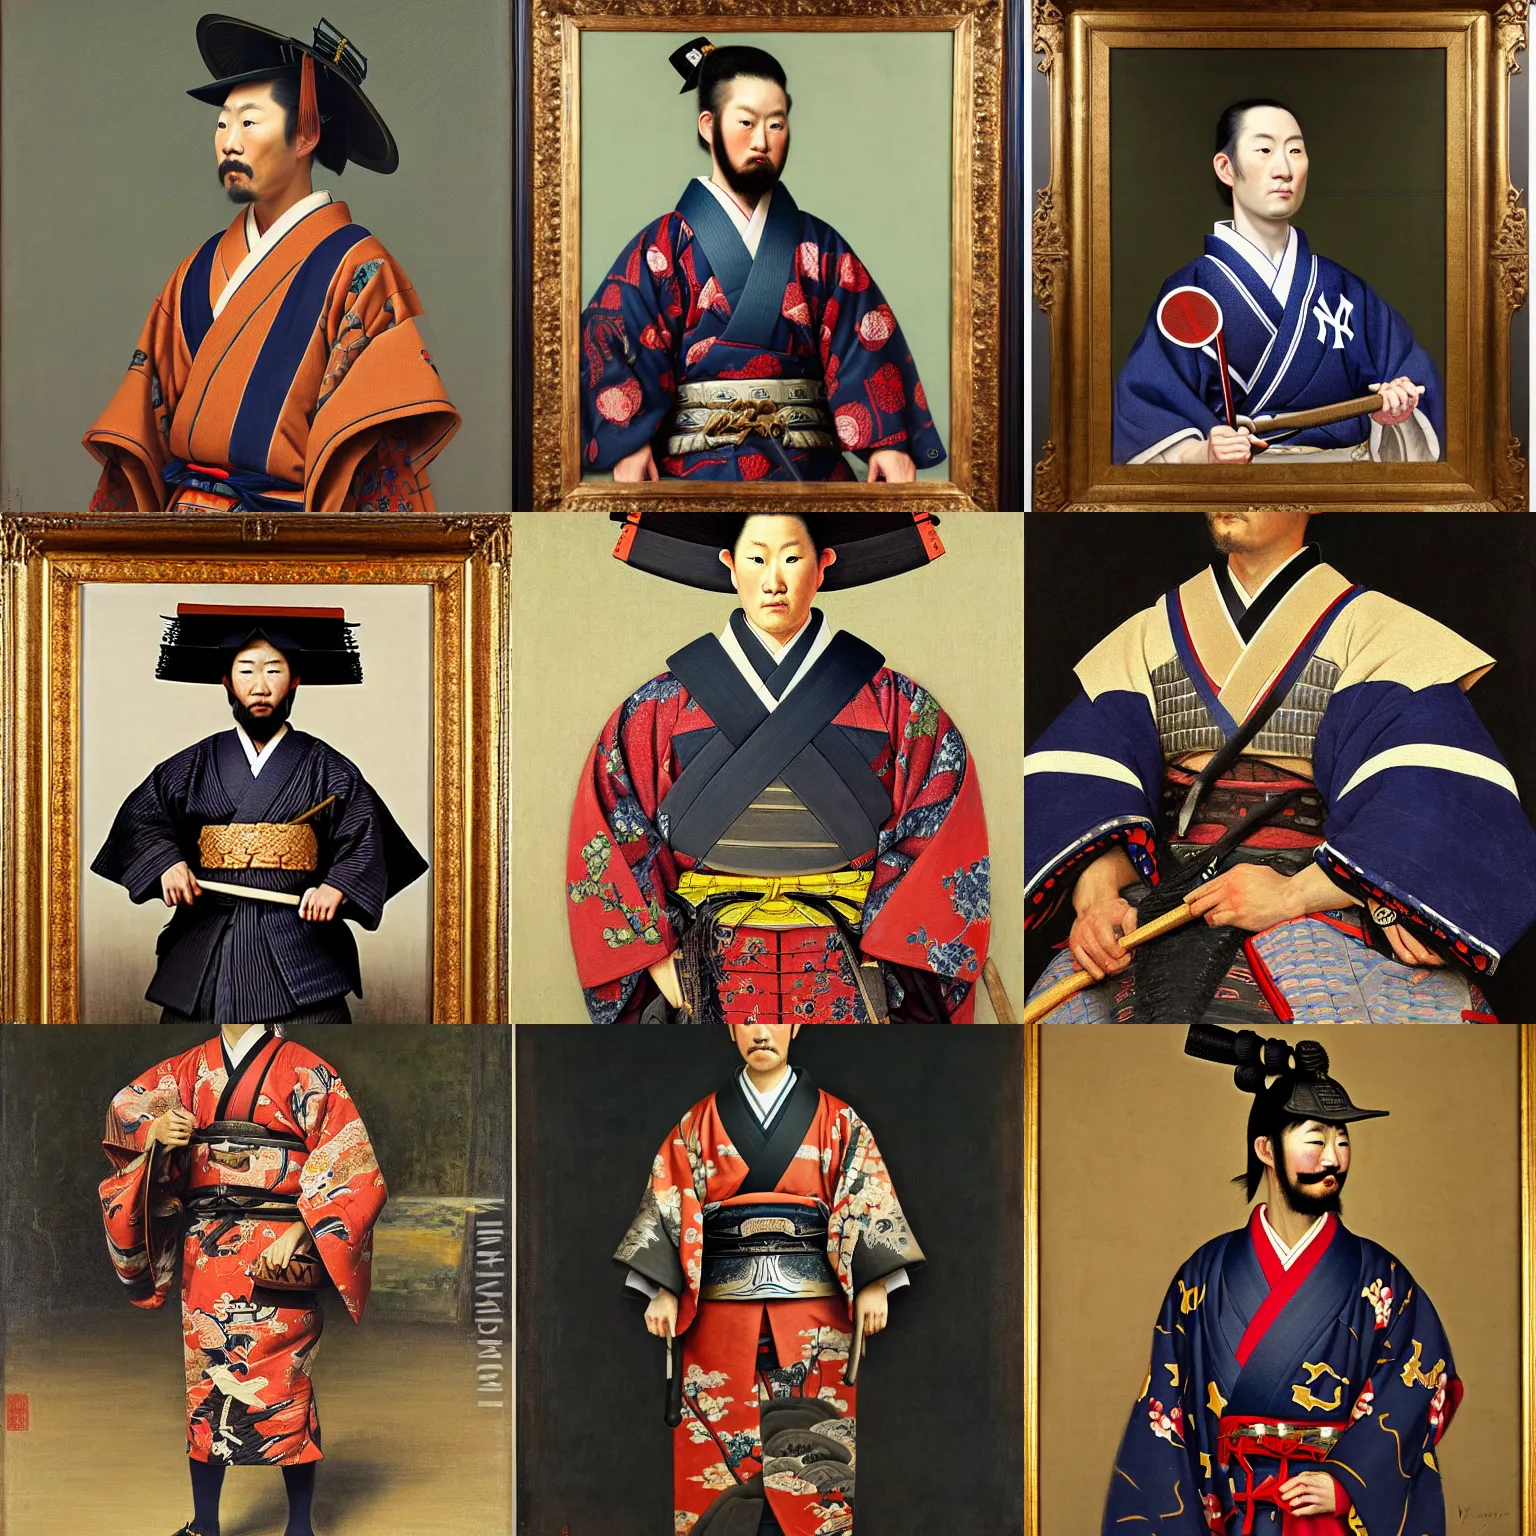 Prompt: portrait of a samurai, new york yankees themed kimono, oil on canvas by william sidney mount, 1 8 8 8 digital art